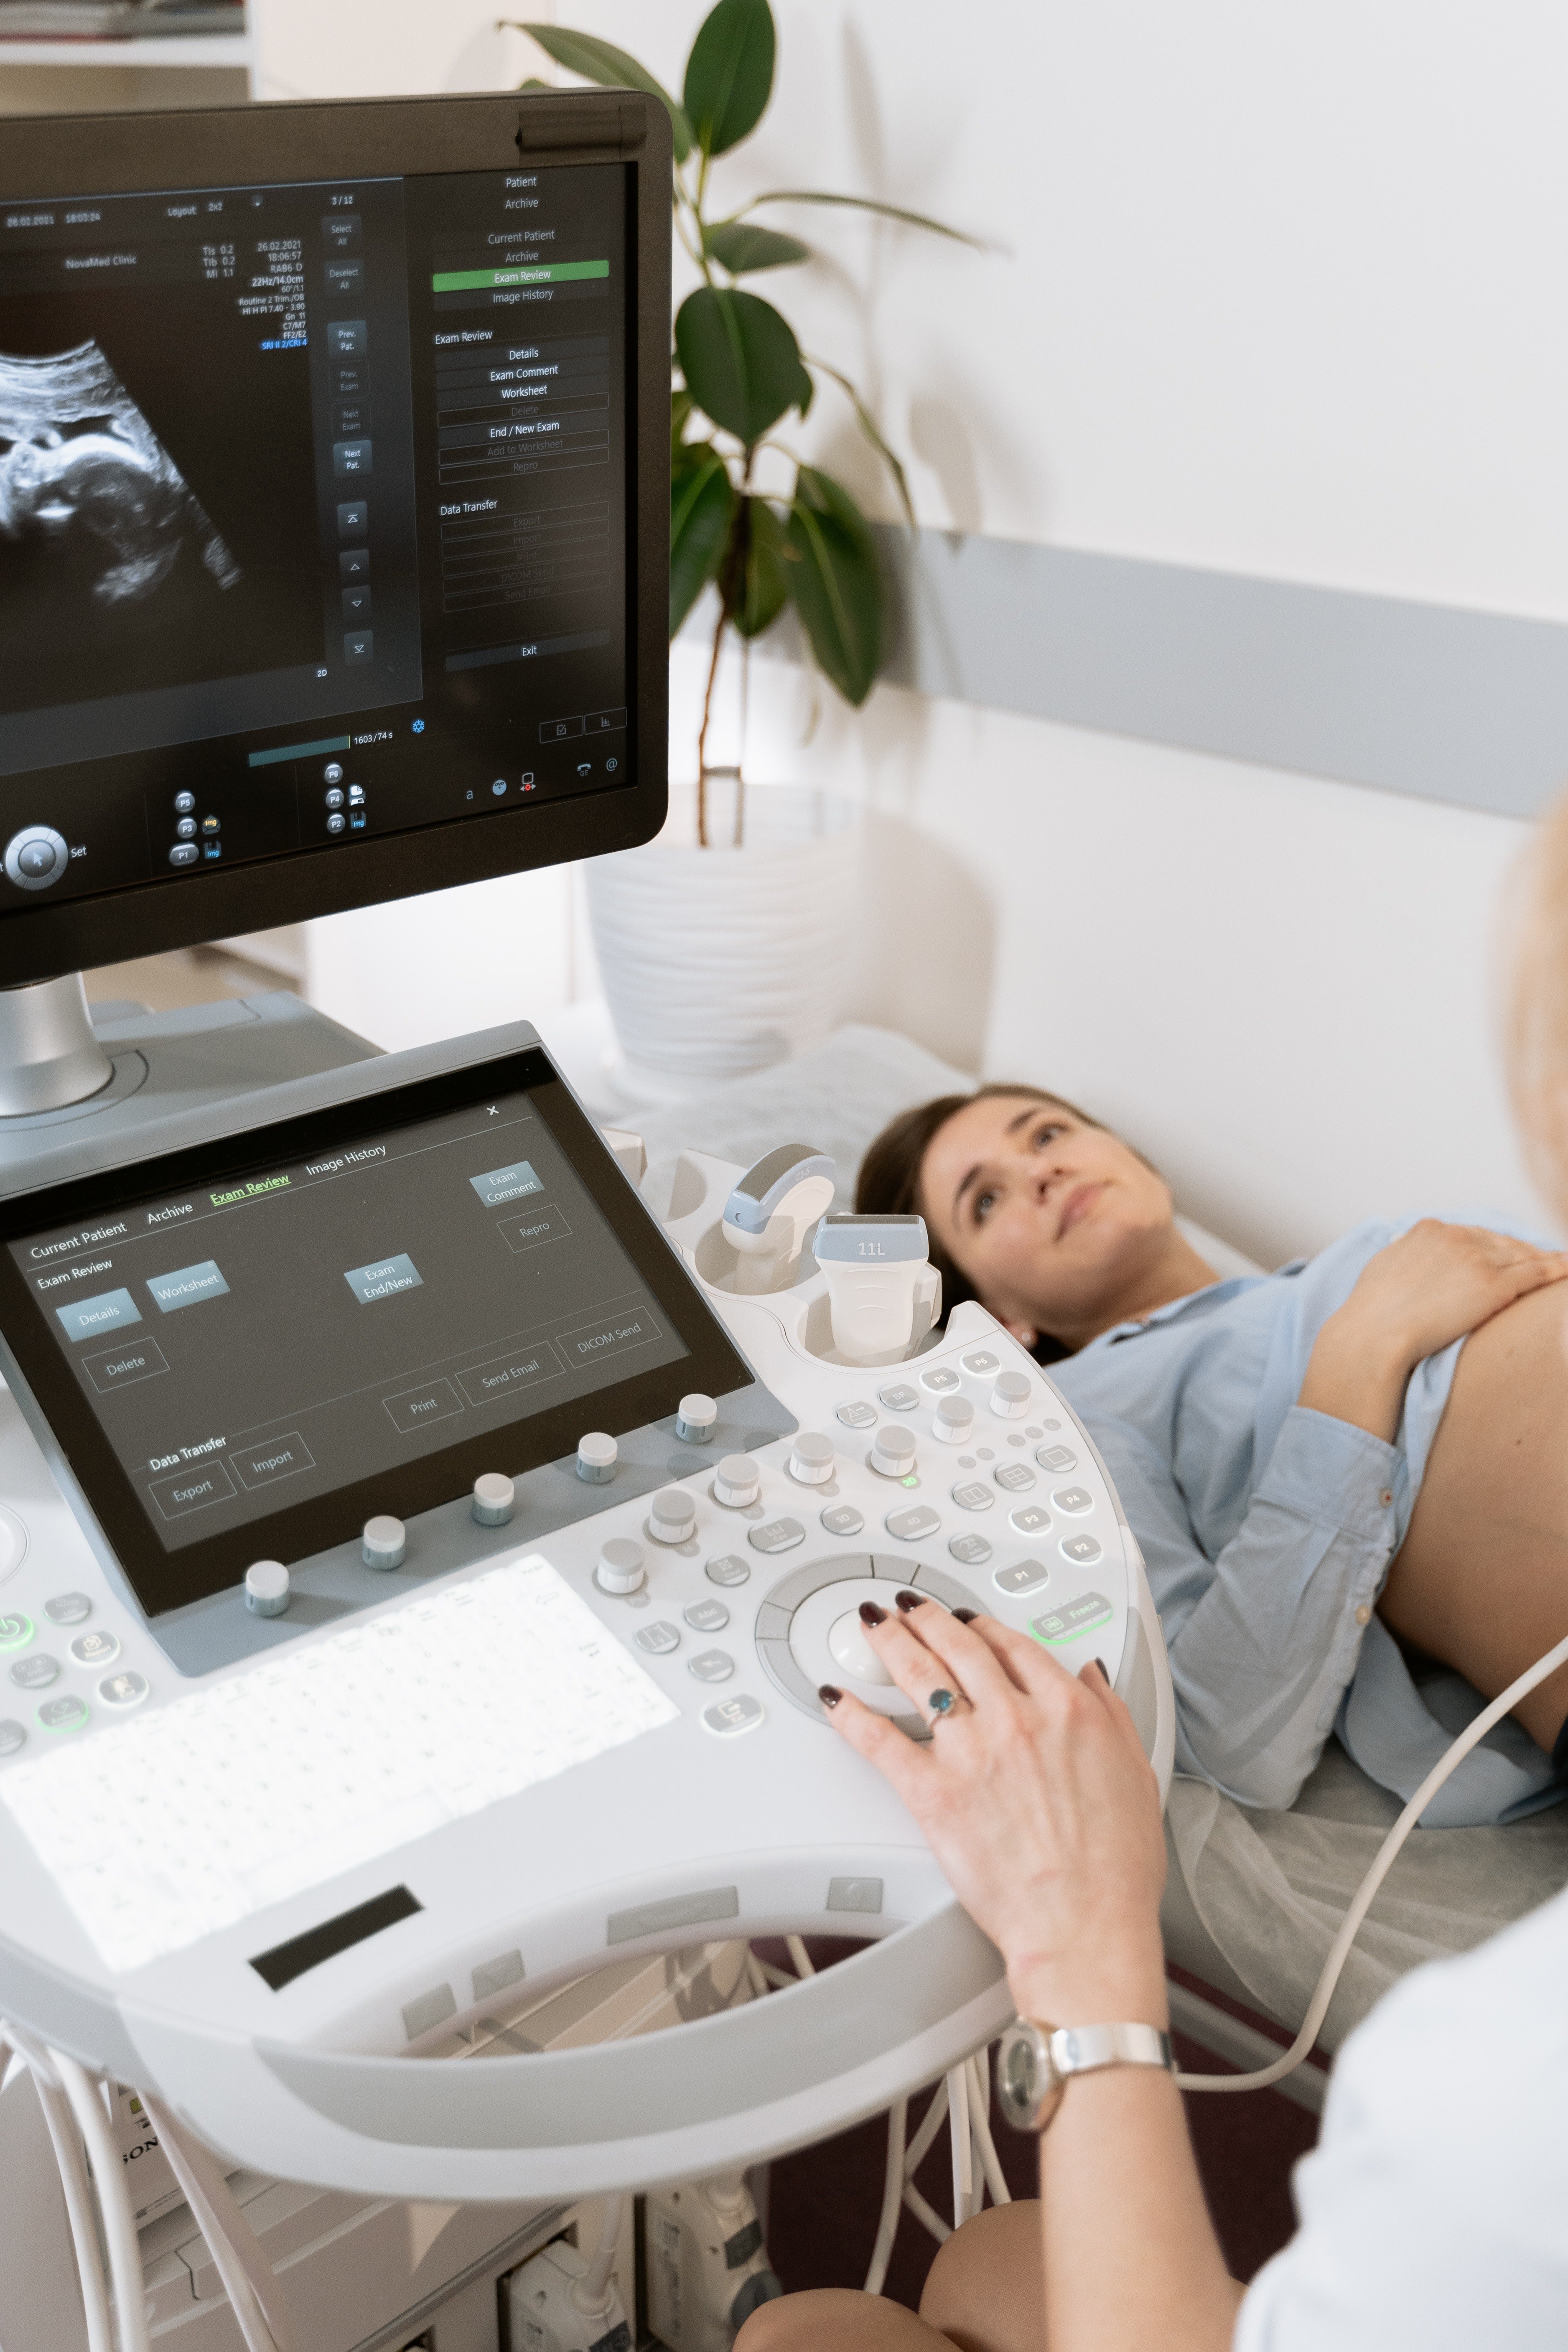 The couple visited the clinic for the ultrasound, but the doctor discovered something ghastly about the baby | Source: Pexels